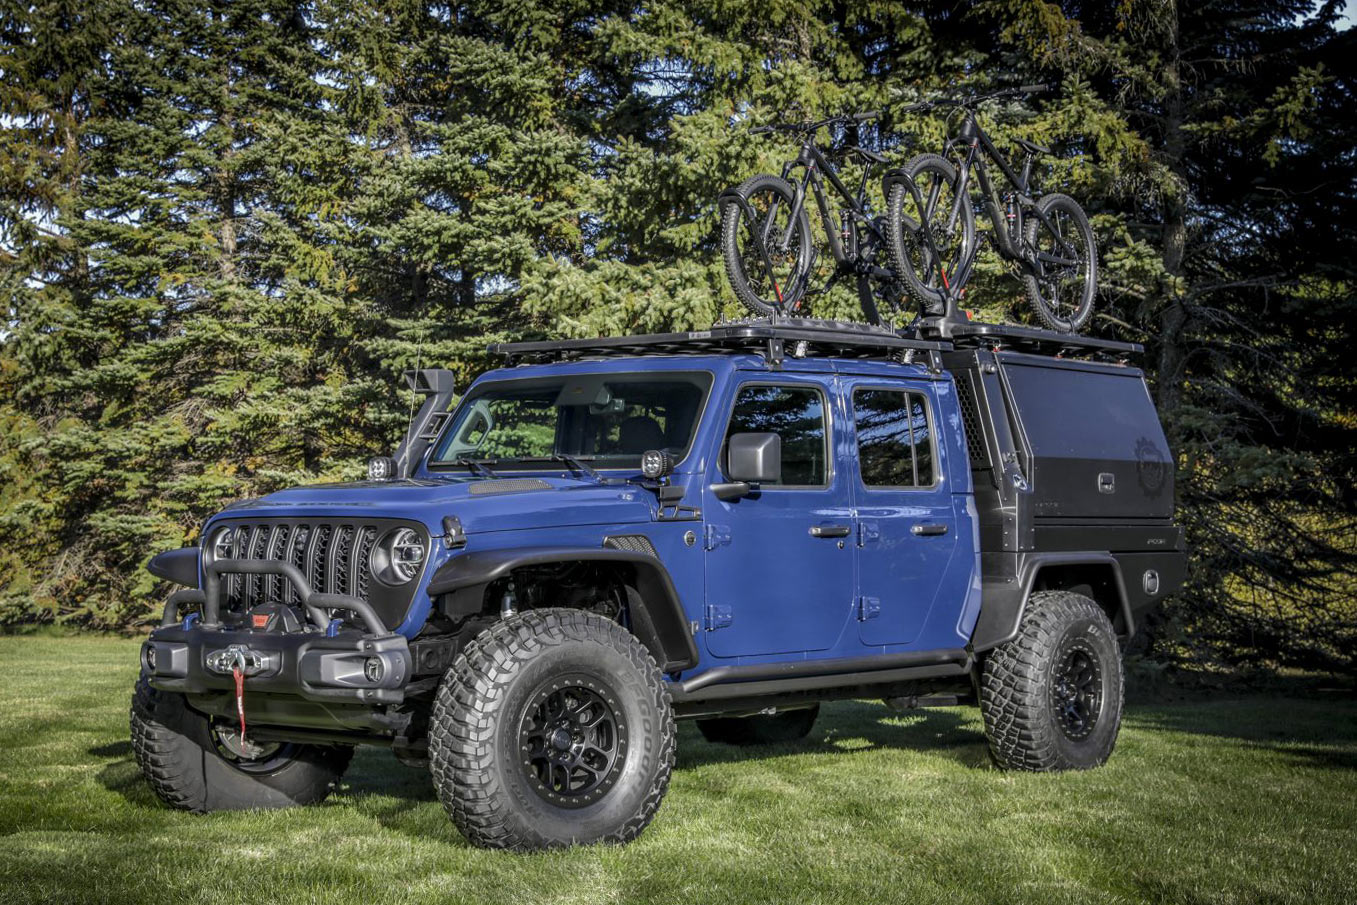 jeep gladiator concept vehicle from mopar - front view